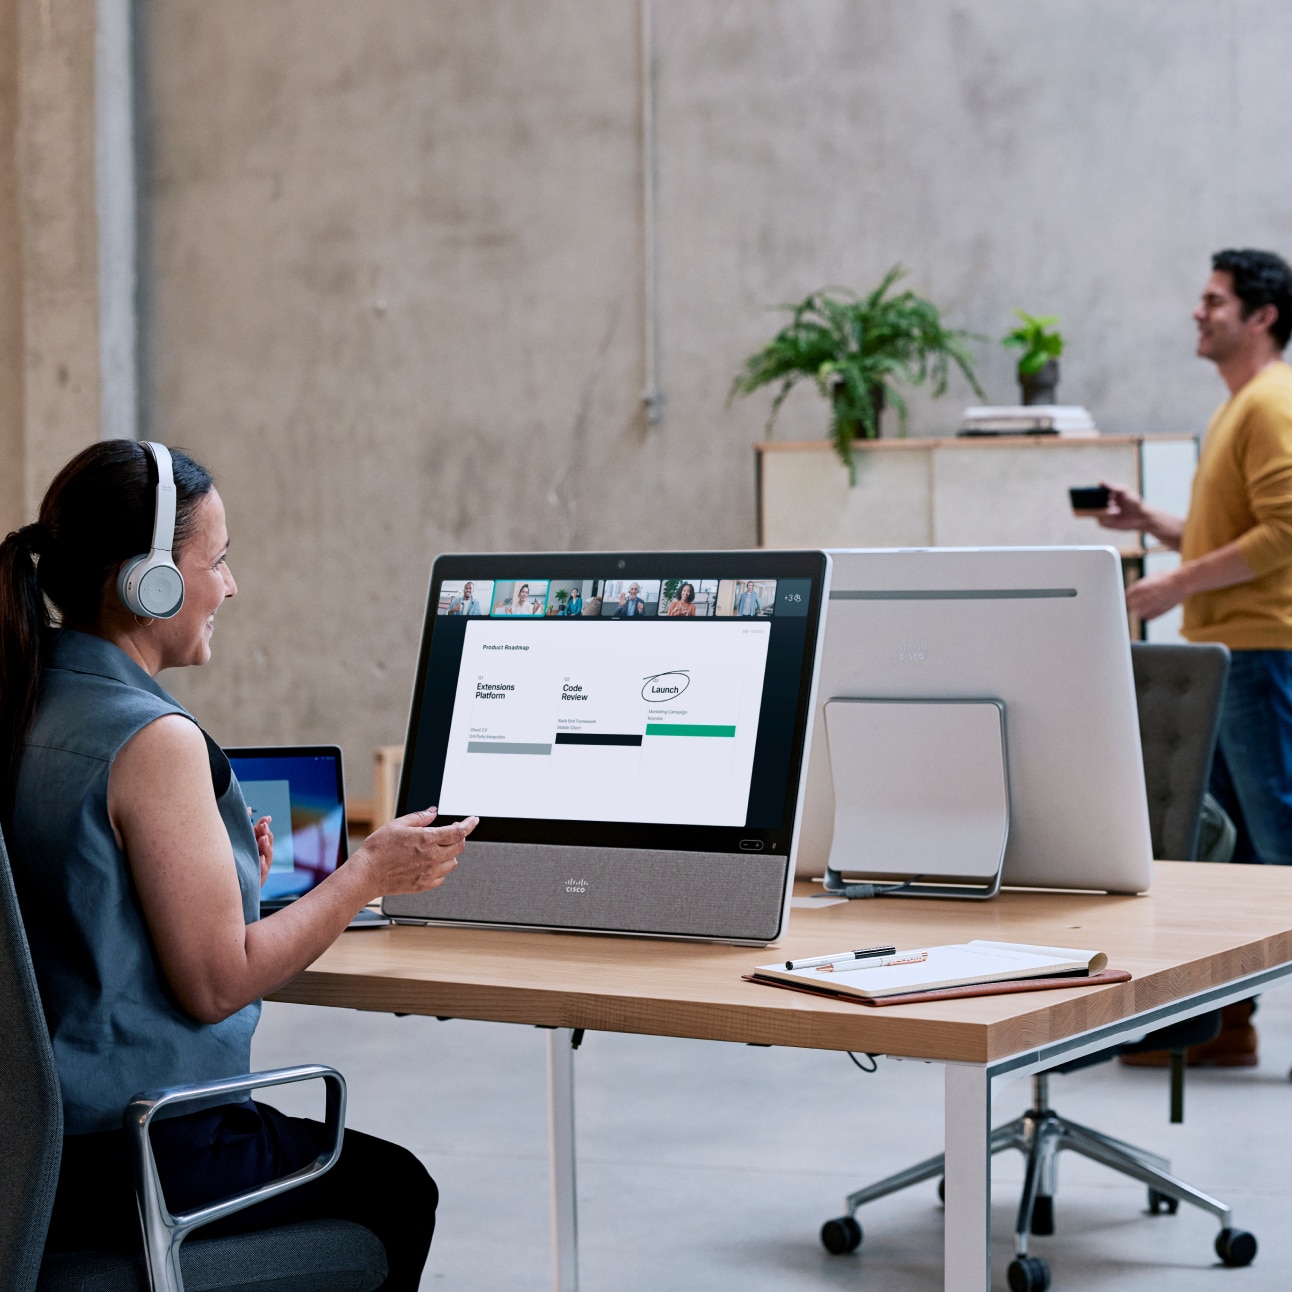 Sitting at a desk in an open office, a professional wearing a headset video conferences with colleagues via a Webex Desk.